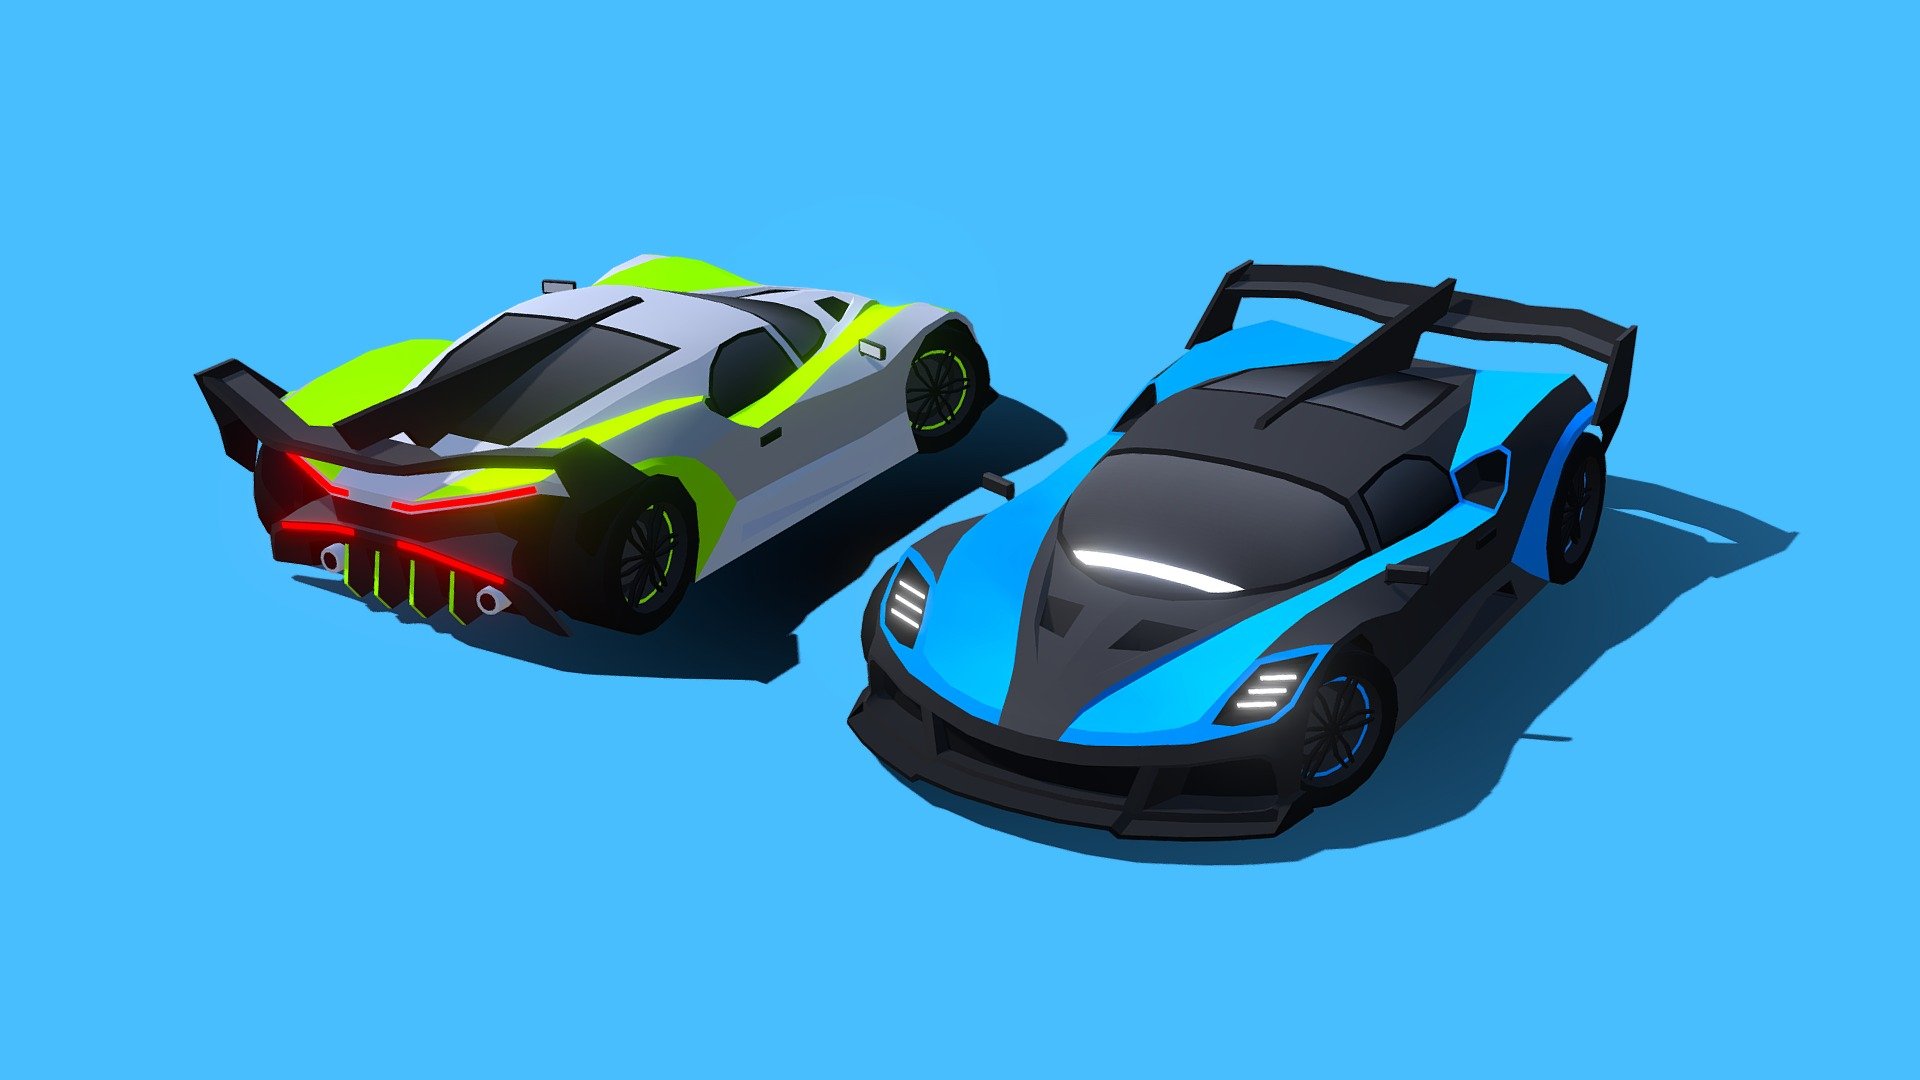 Hello!. 

This is a racing car called &lsquo;Cerbero'. It is a R class vehicle that is going to be included in the february update (2022.2) of my asset called ARCADE: Ultimate Vehicles Pack. I hope you like this model!

Best regards, Mena 3d model